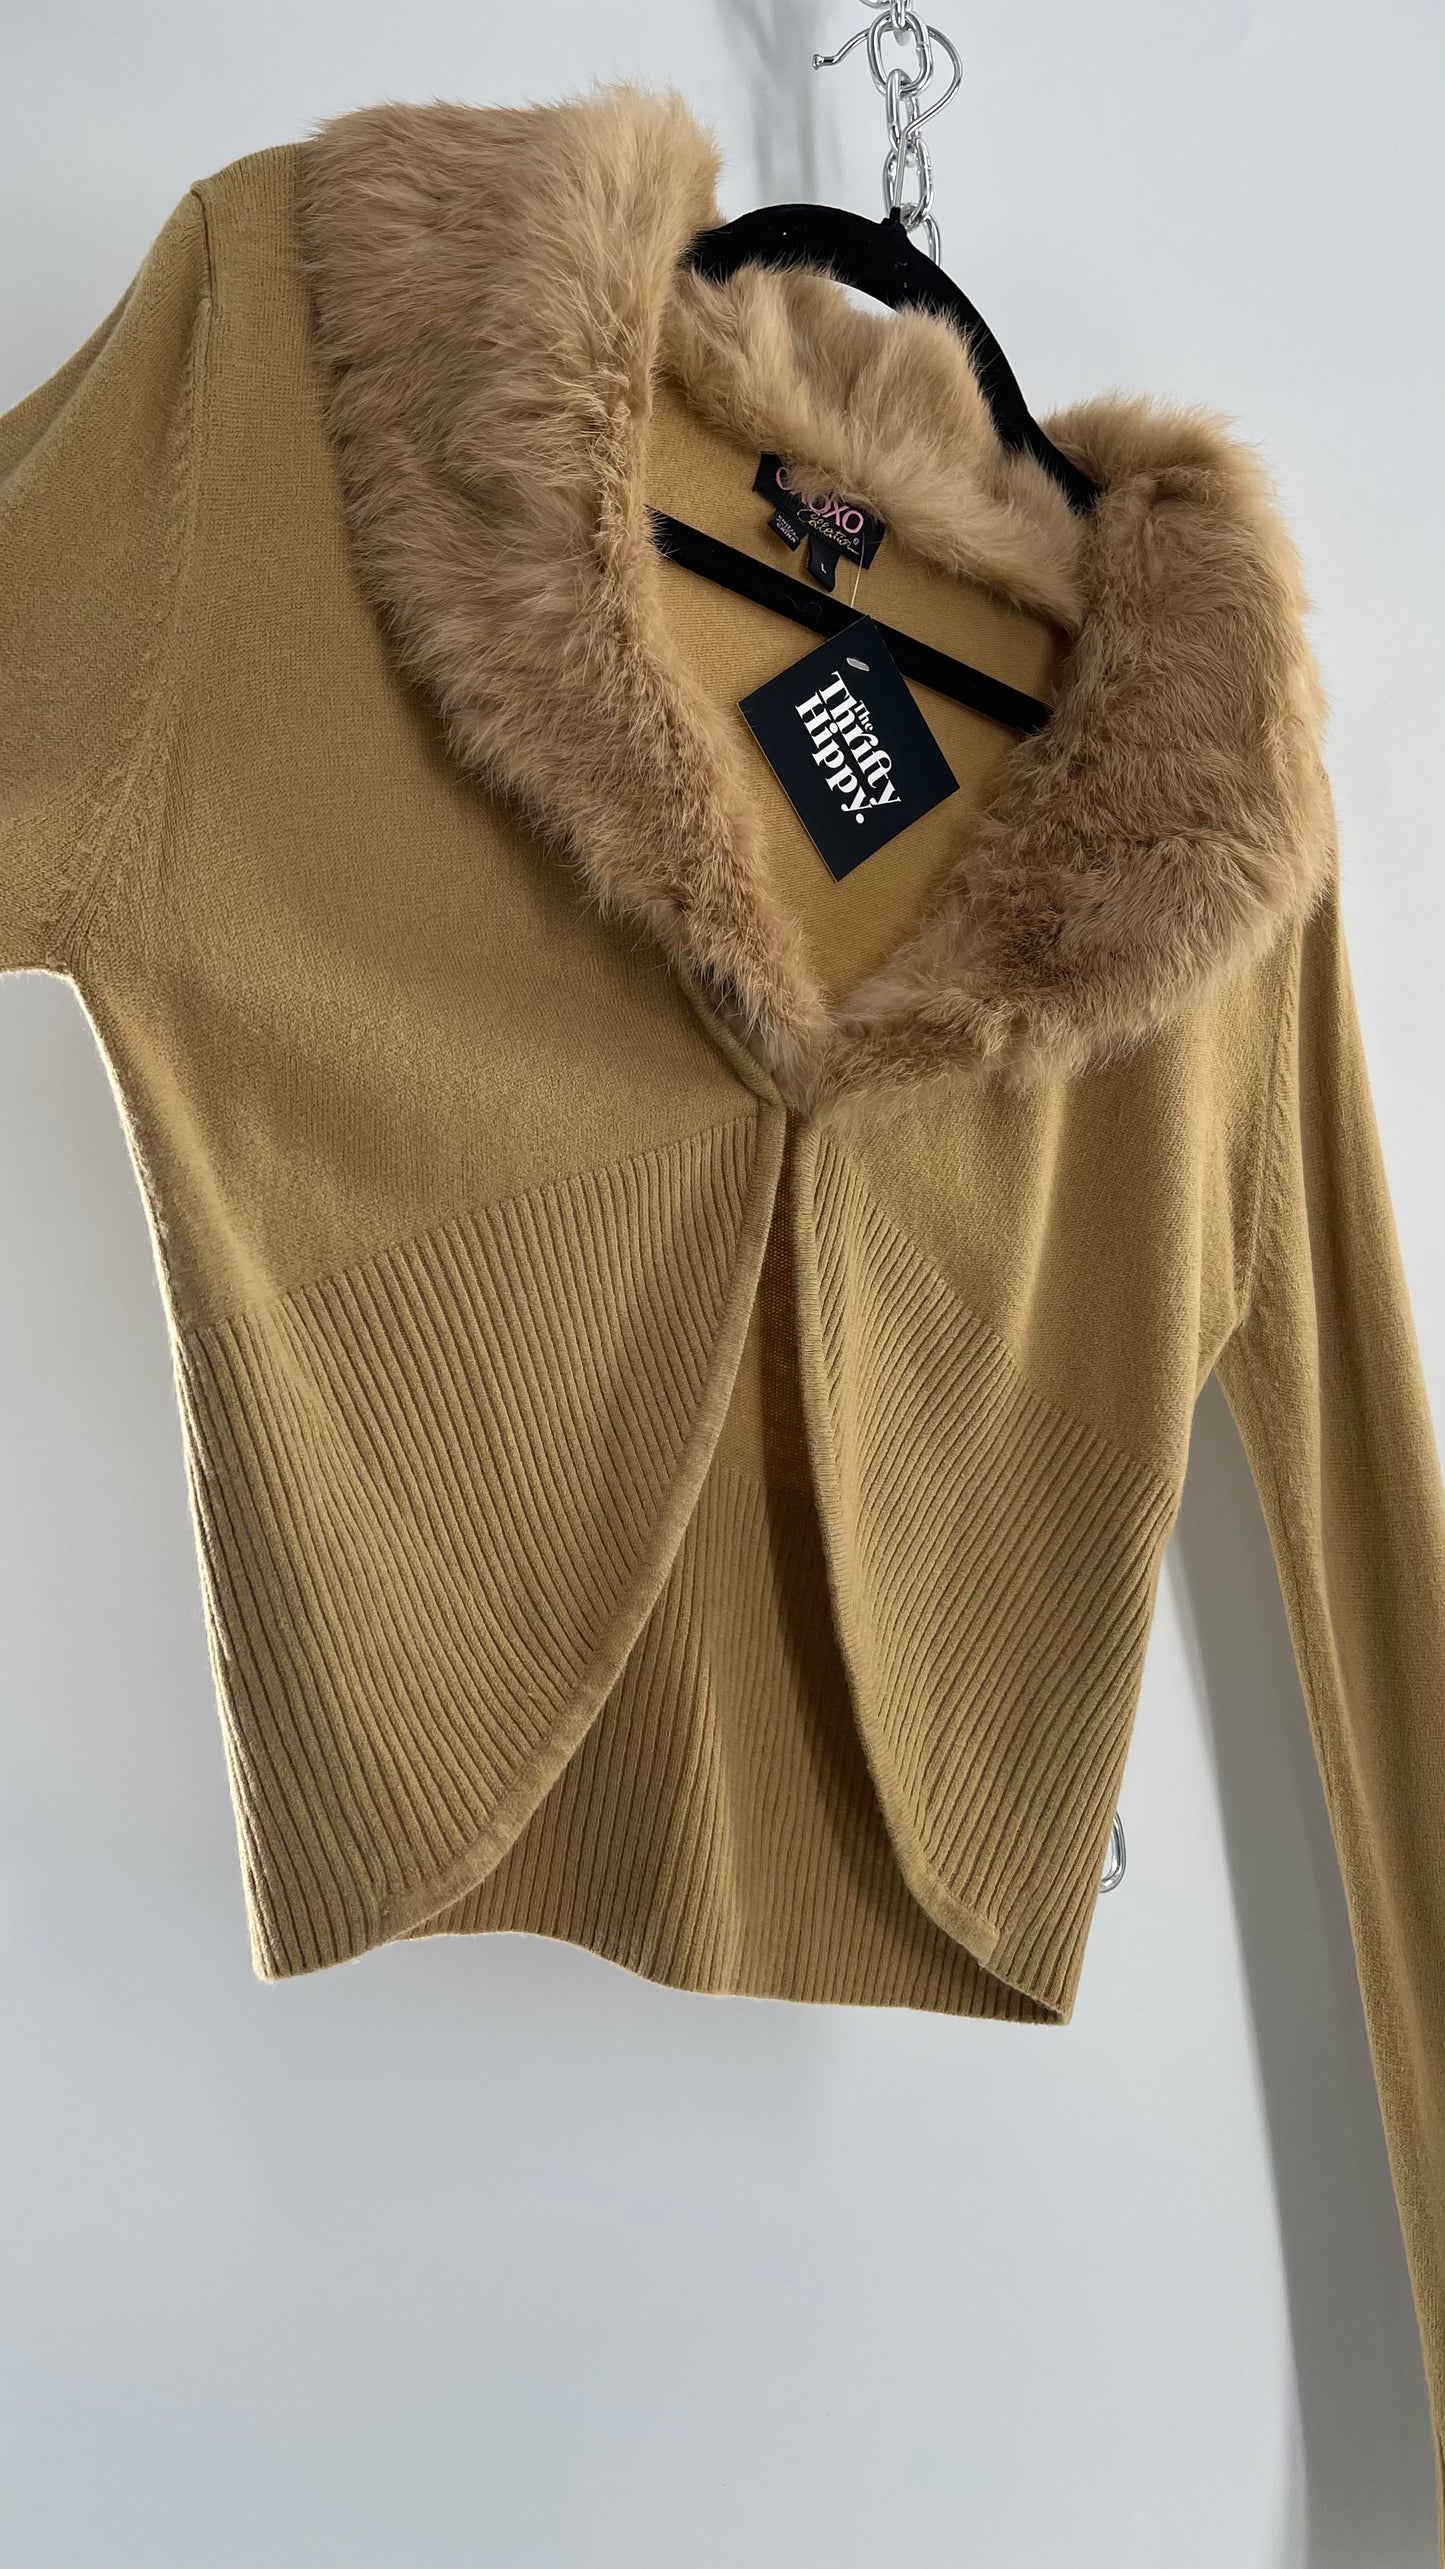 Vintage XOXO Tan Fasten Bust Cropped Cardigan Shrug with Genuine Rabbit Fur Exaggerated Collar (Large)